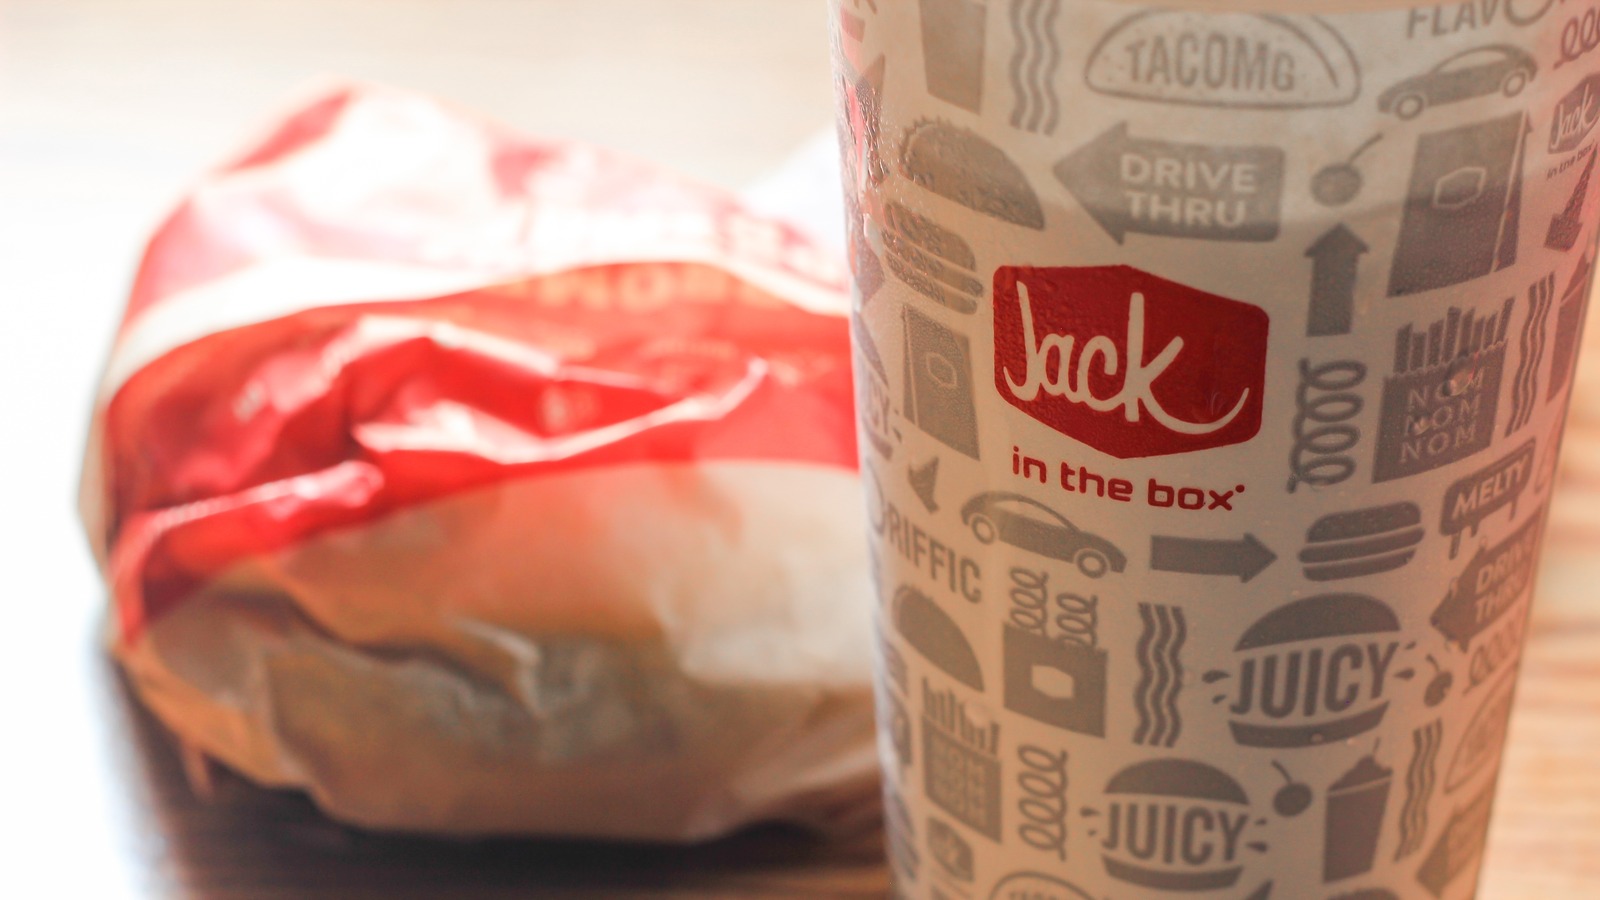 Jack In The Box Just Partnered With Miso Robotics. Here's Why - Image